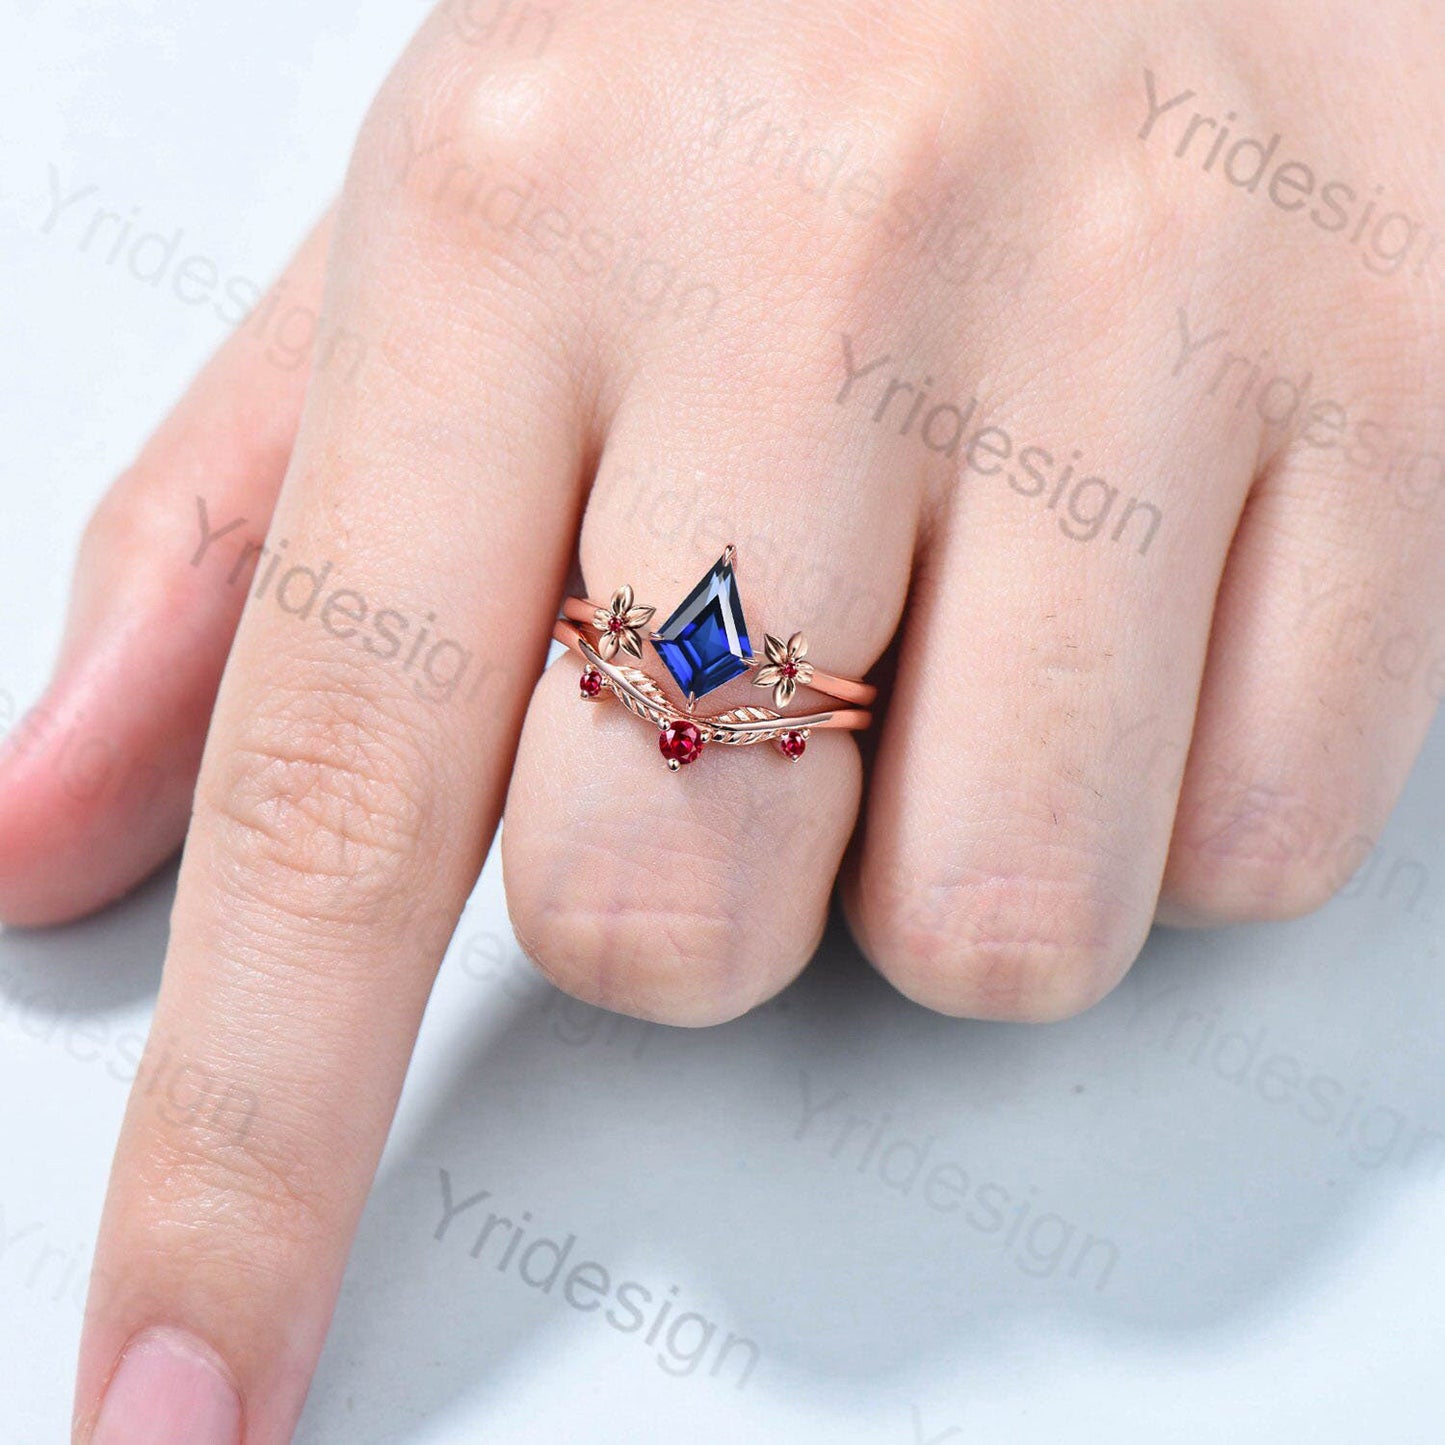 Floral Kite Cut Sapphire Ruby Engagement Ring Set Silver Rose Gold Leaves Flower Wedding Ring Set For Women Minimalist Handmade Jewelry - PENFINE